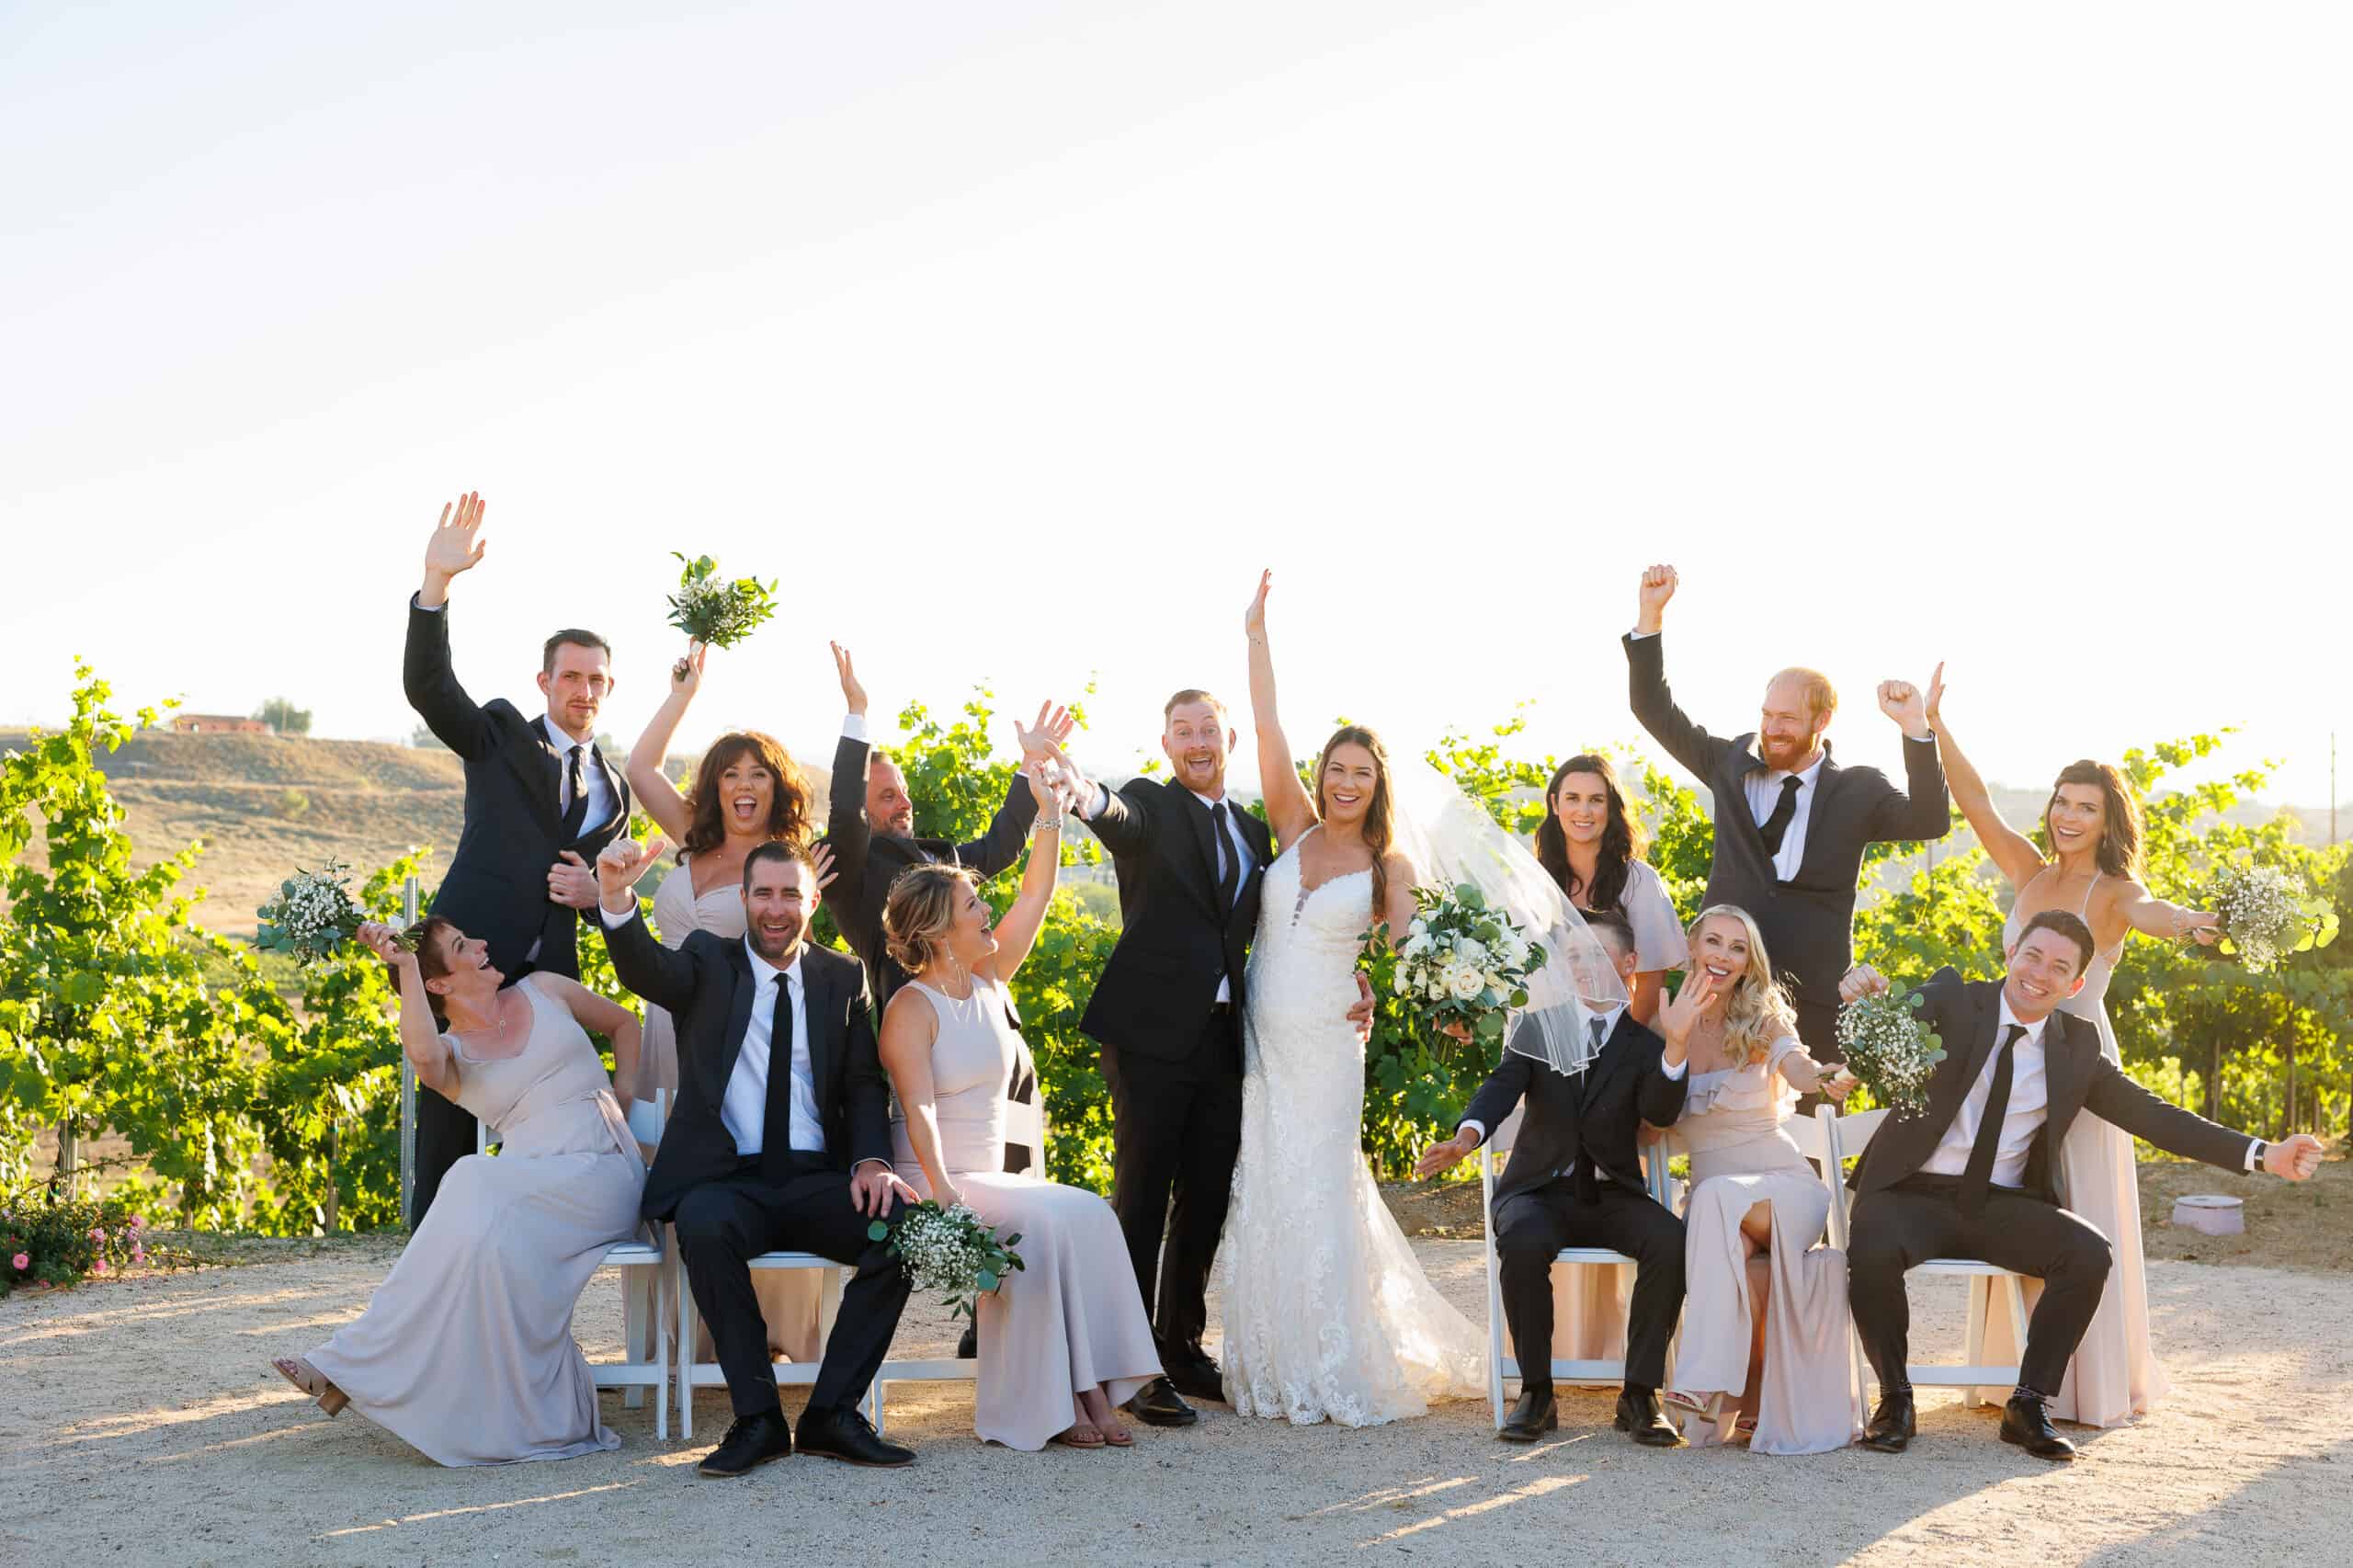 A wedding party at Avensole Winery in Temecula, CA, photographed by Courtney McManaway Photography